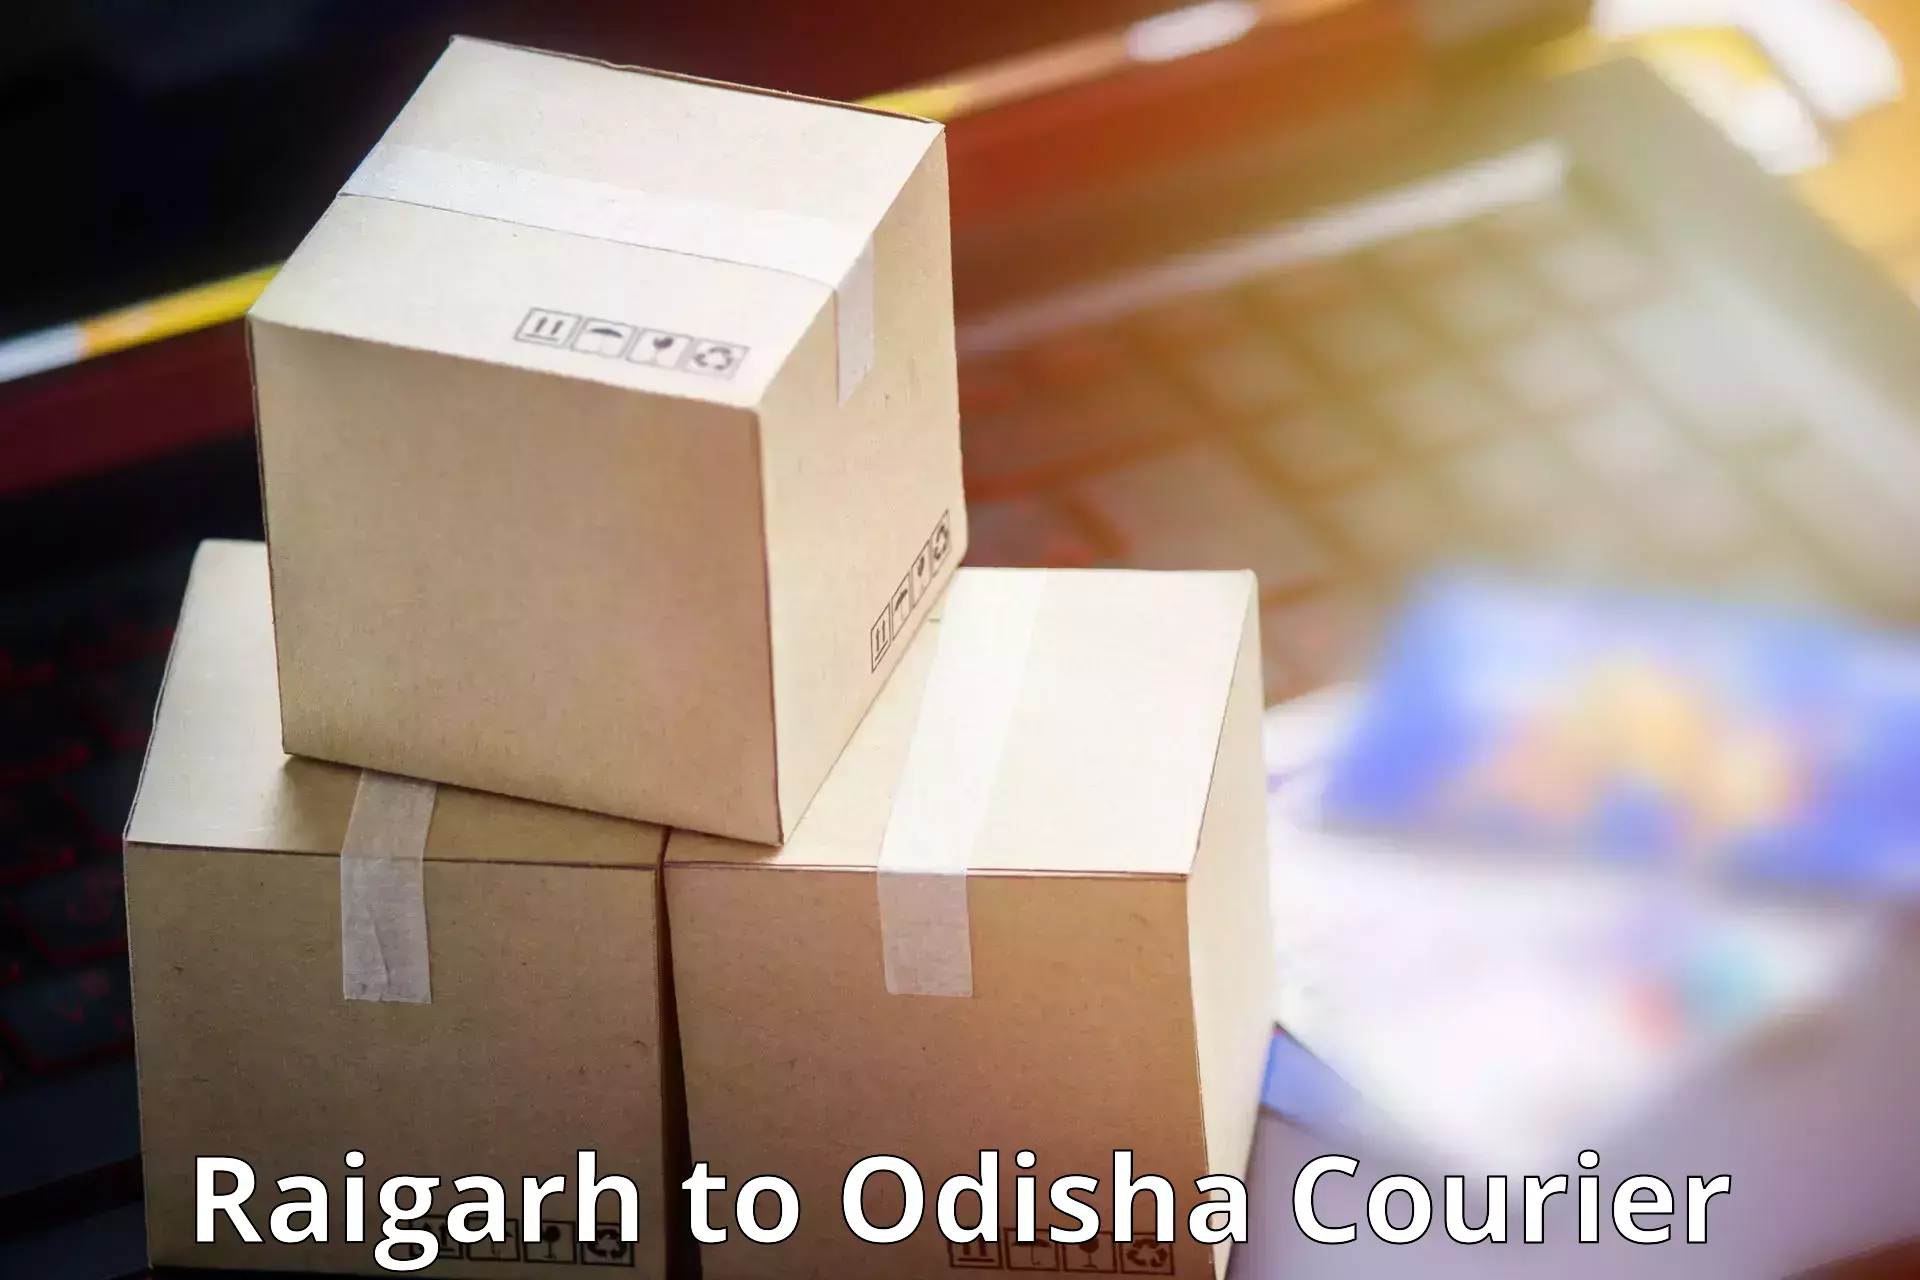 User-friendly delivery service Raigarh to Bonth